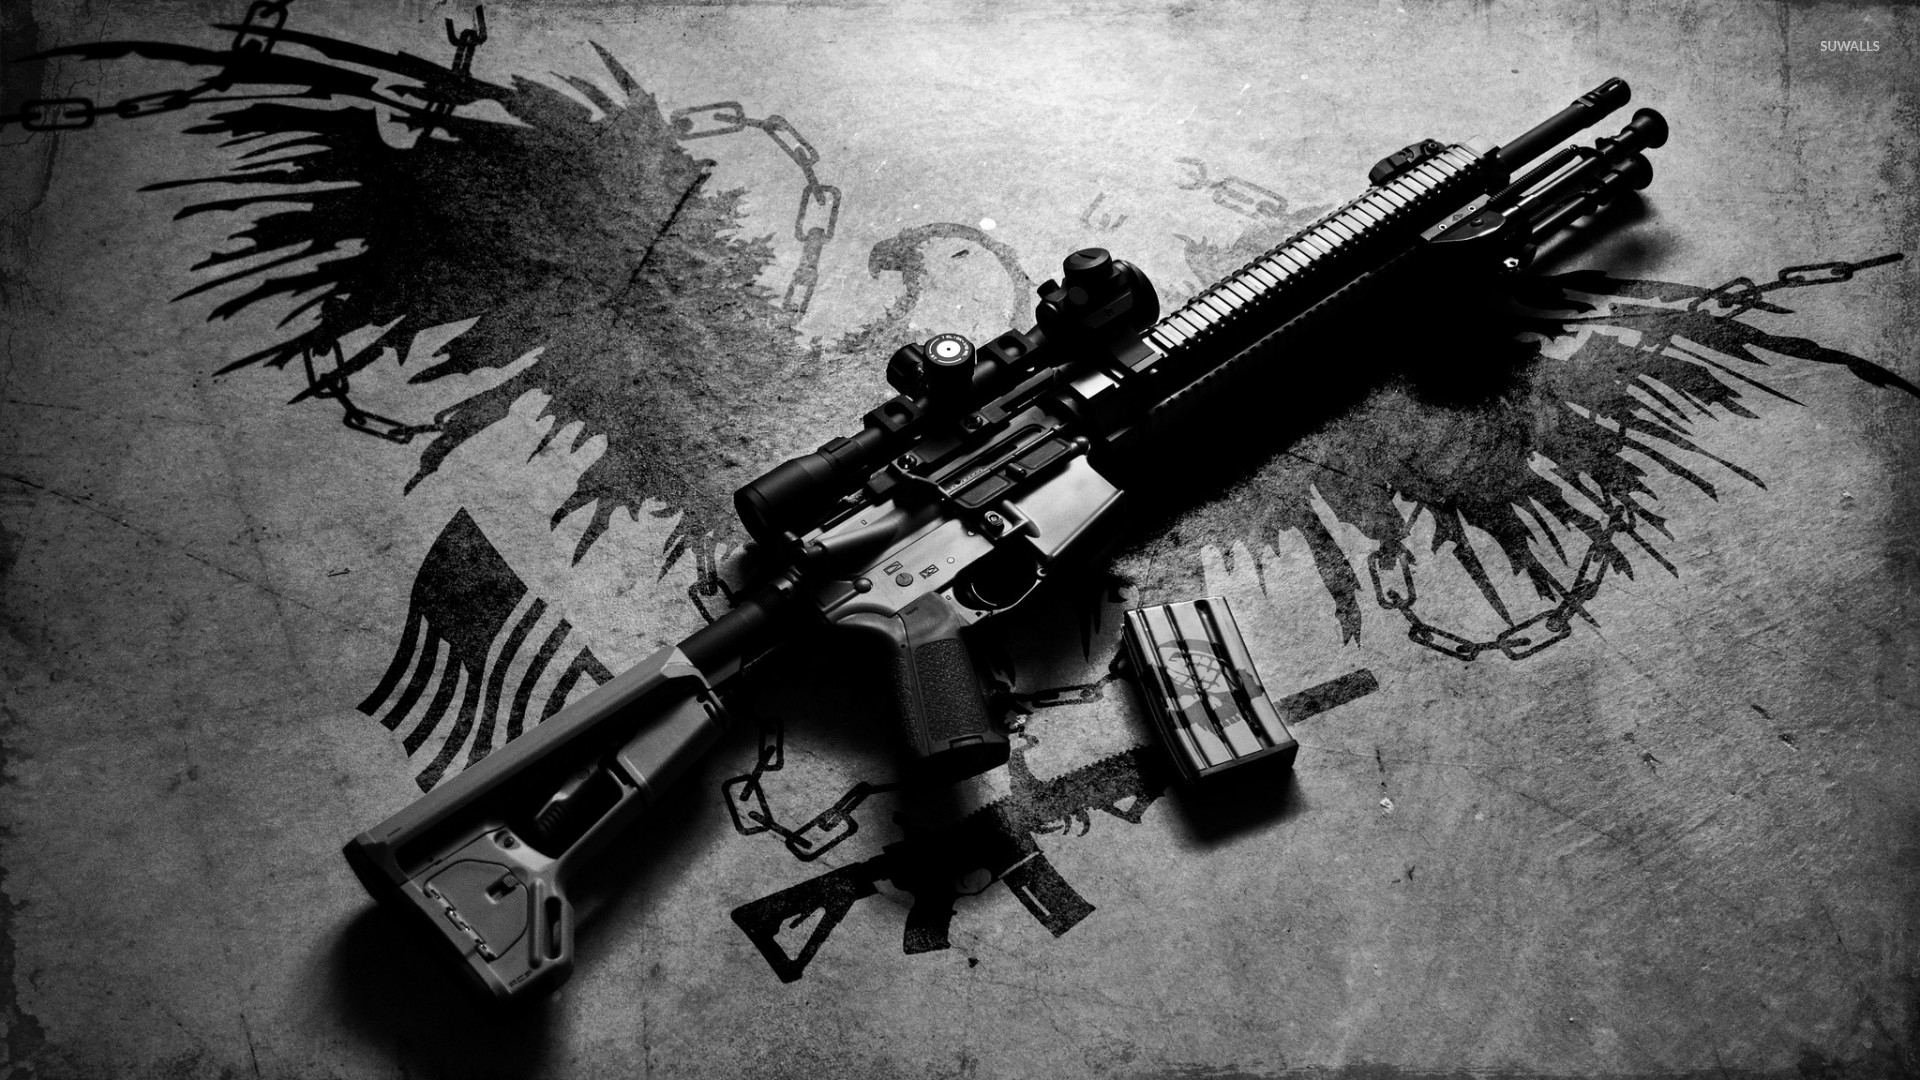 Ar 15 Rifle On The Ground Wallpaper Photography Wallpapers 54296 Images, Photos, Reviews